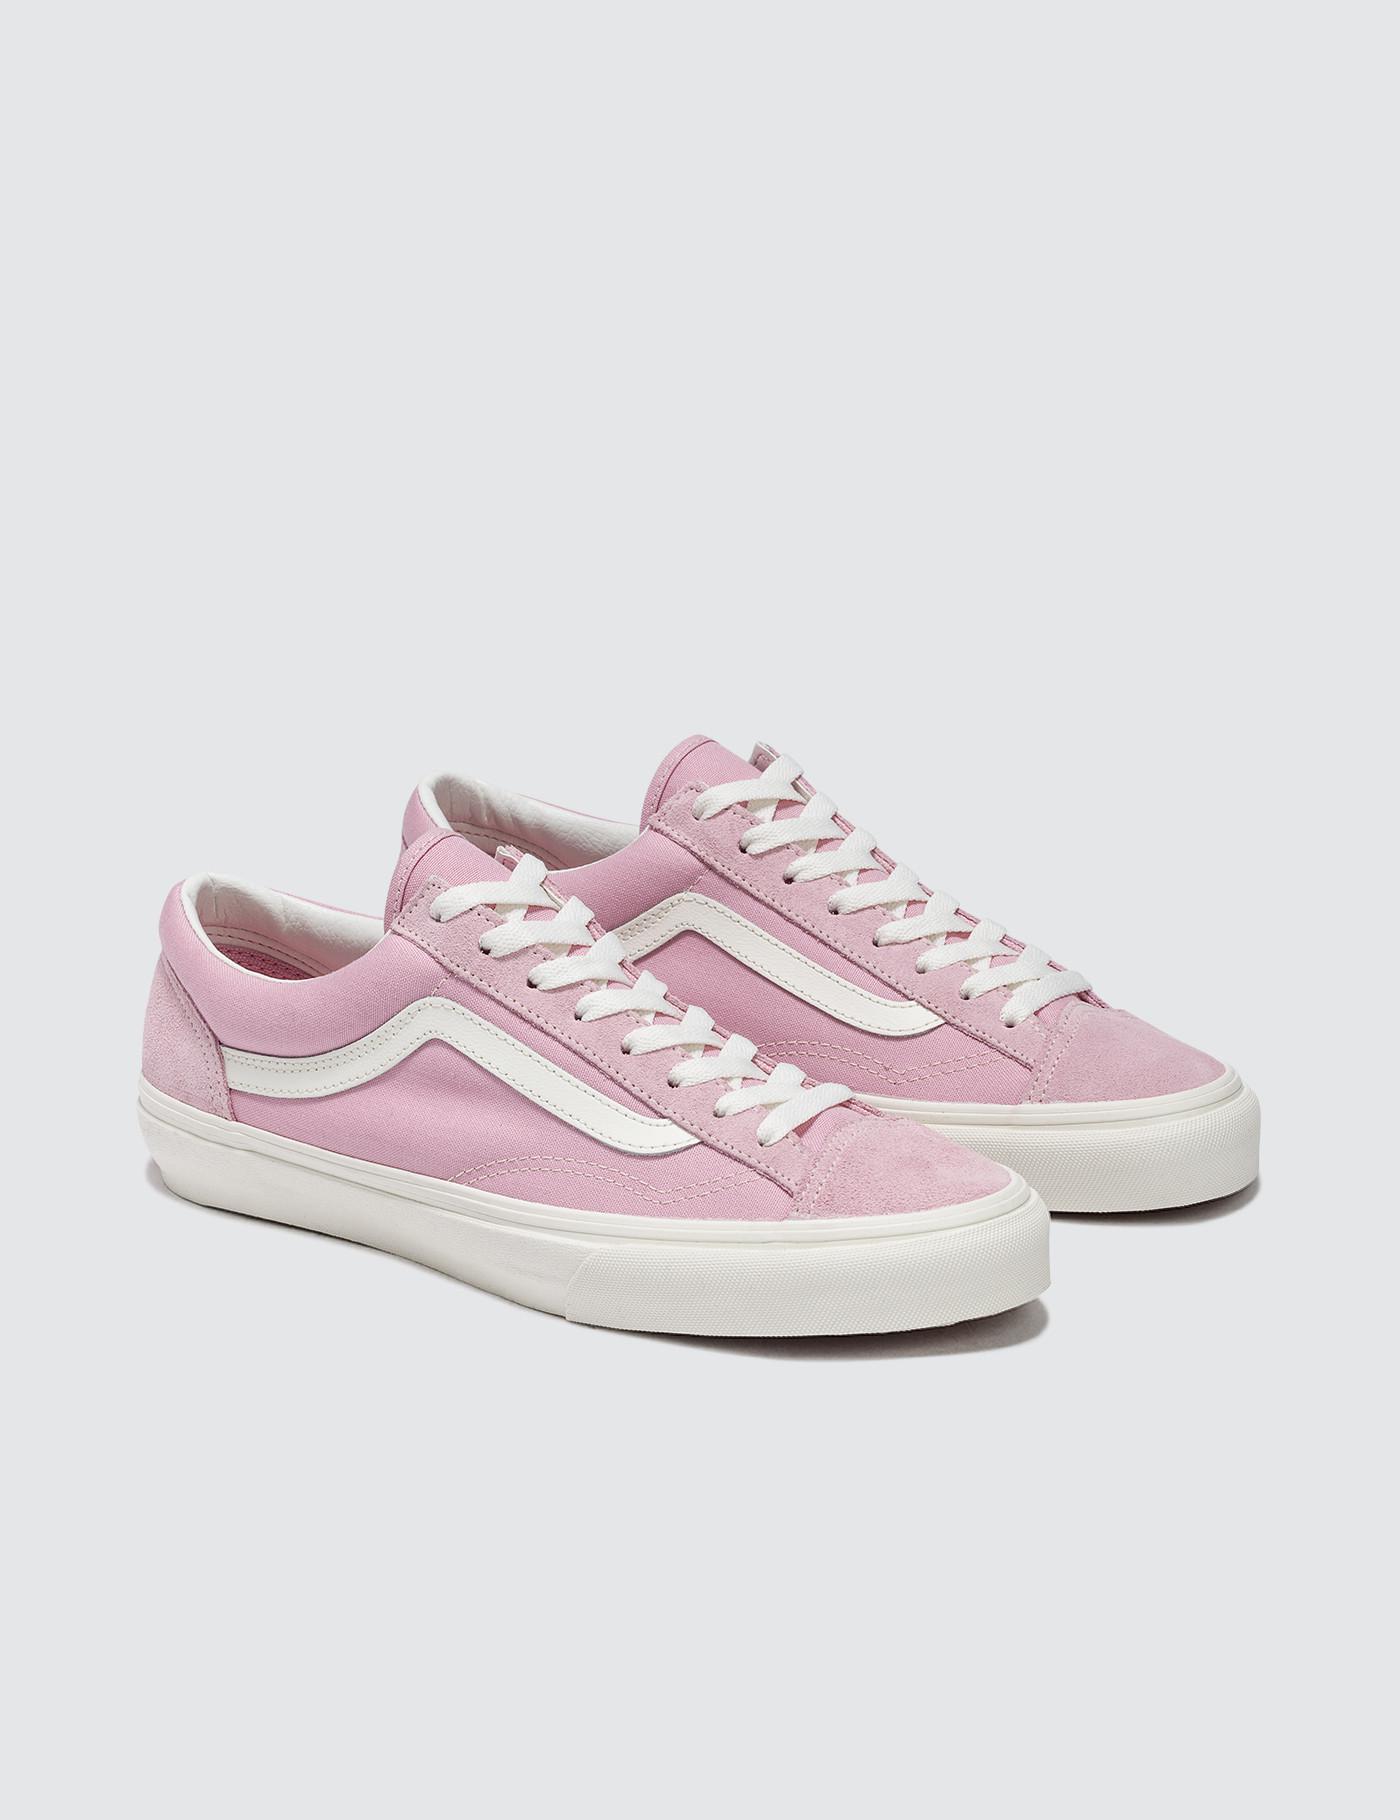 Vans Rubber Style 36 in Pink - Lyst